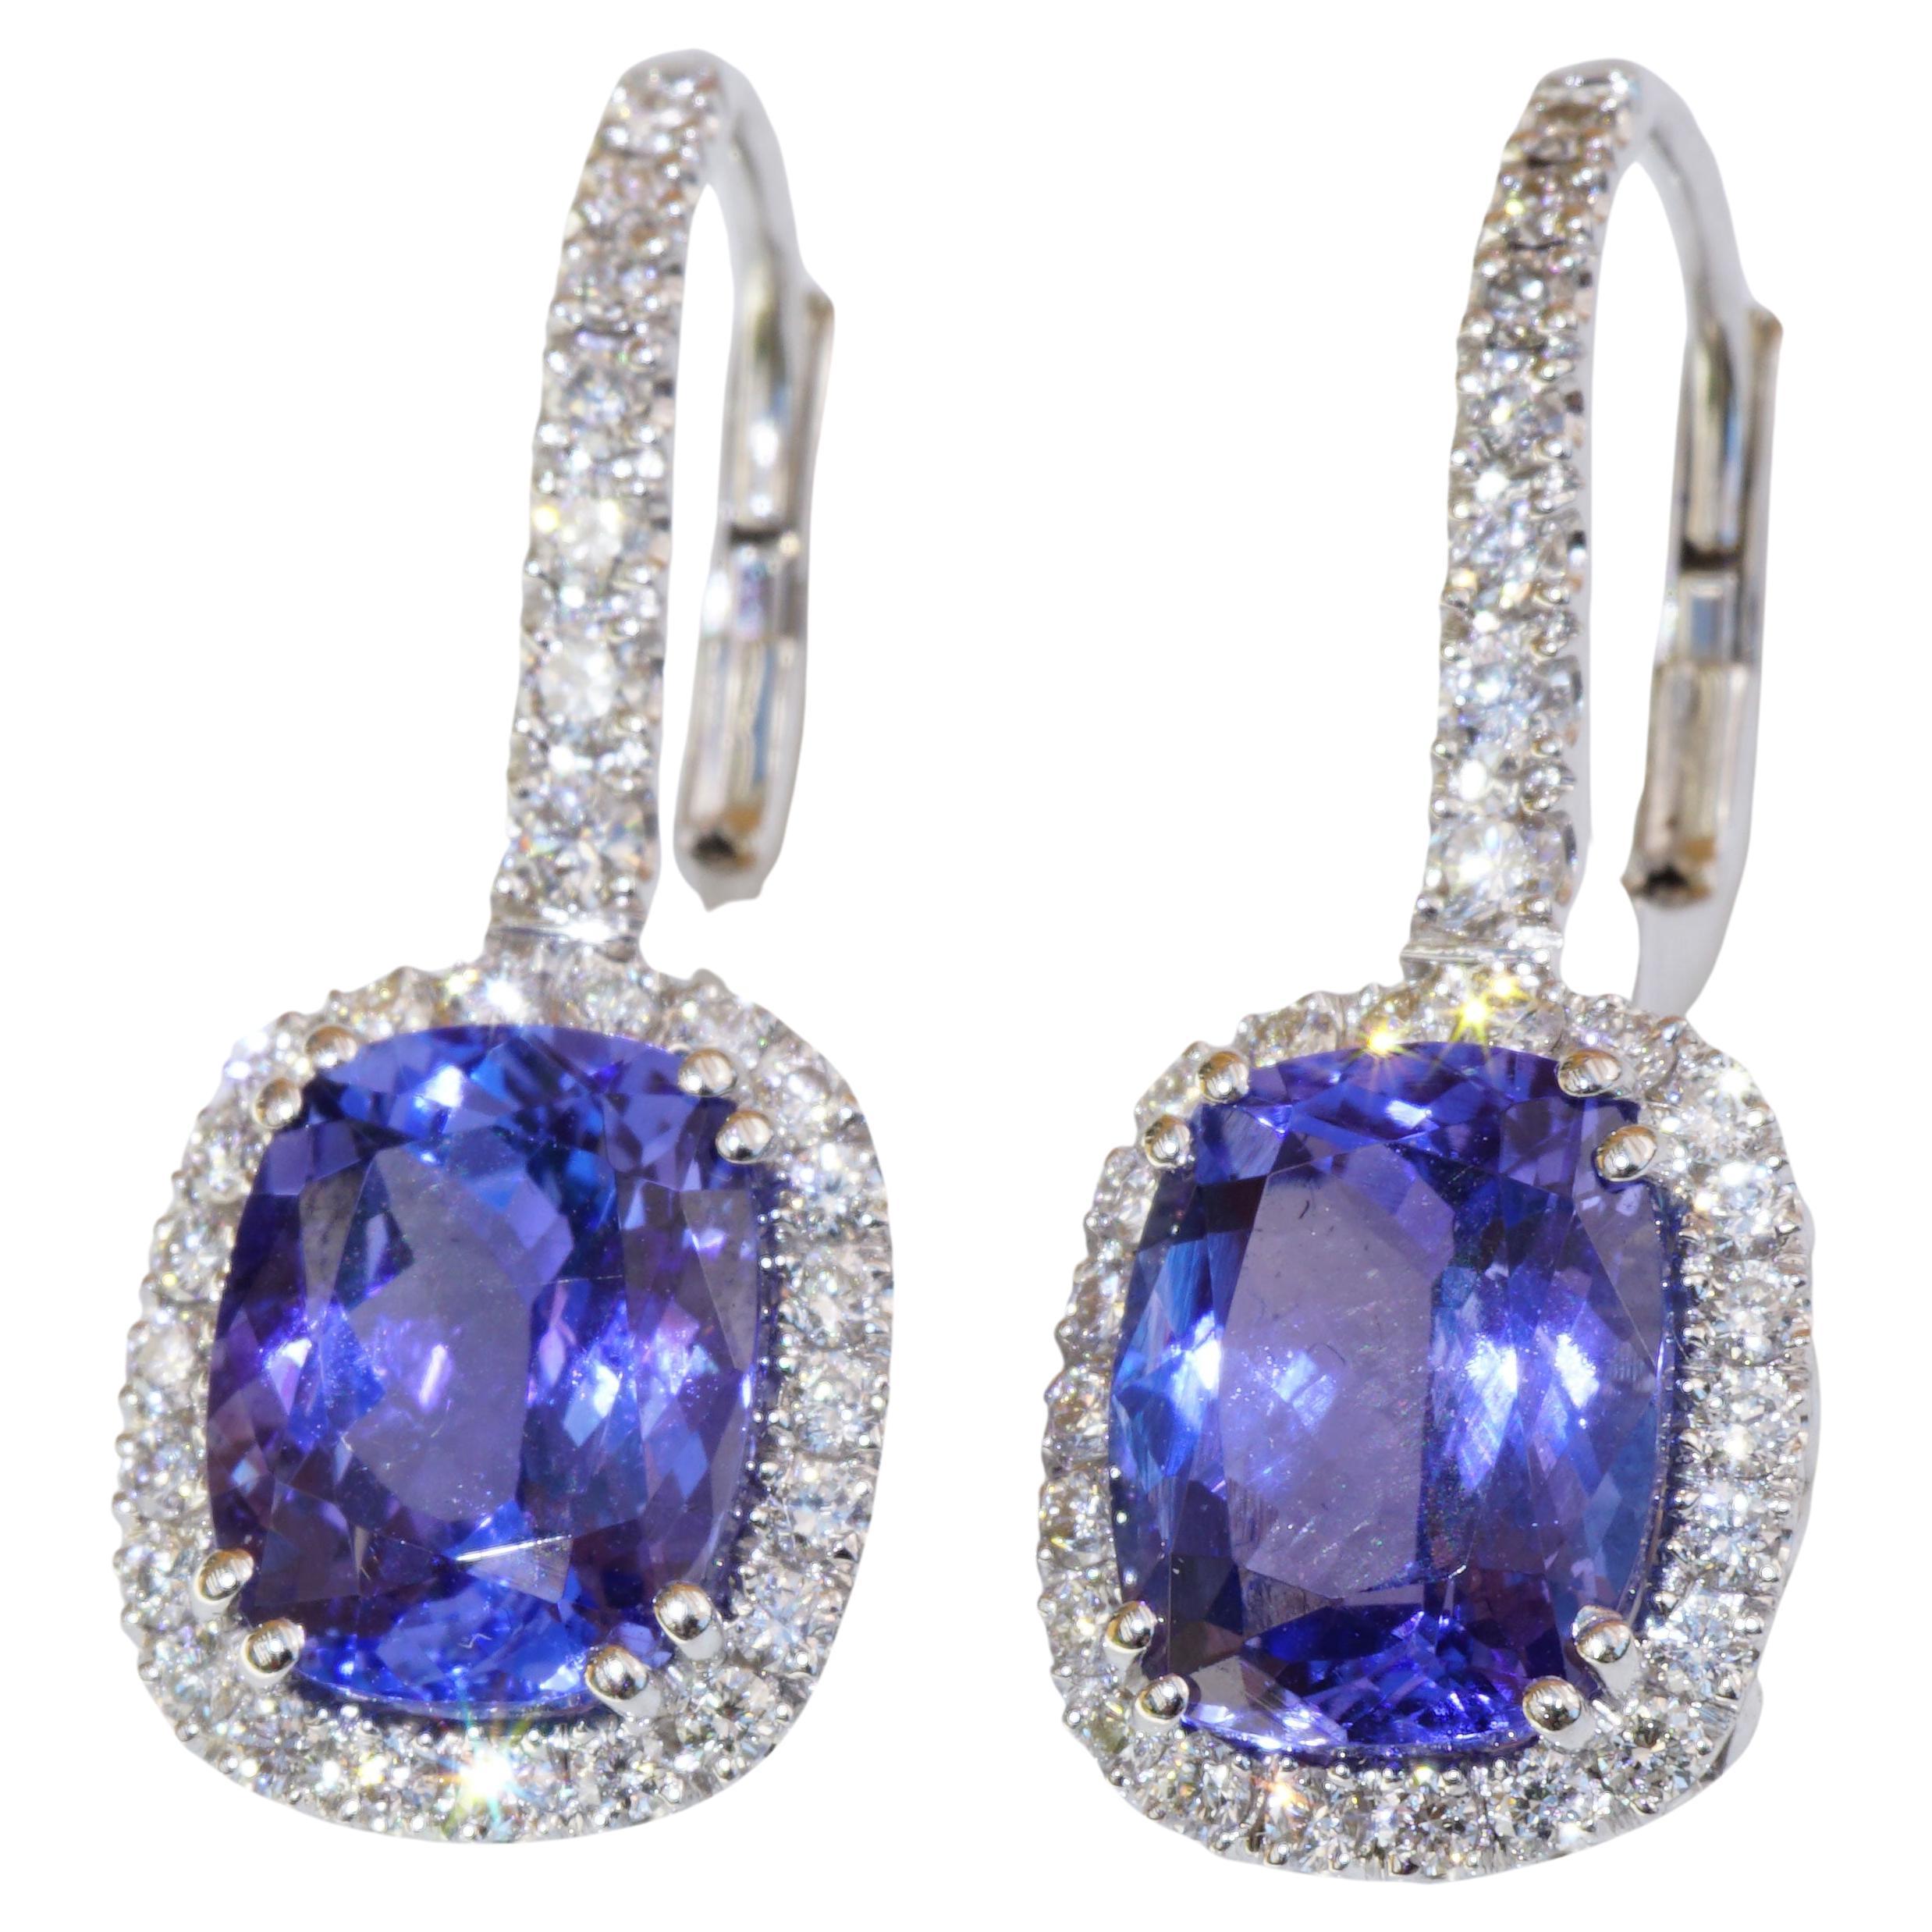 Rectangular Tanzanite AAA+ 4.70 Ct Dream Earrings with Diamonds 18 Kt White Gold For Sale